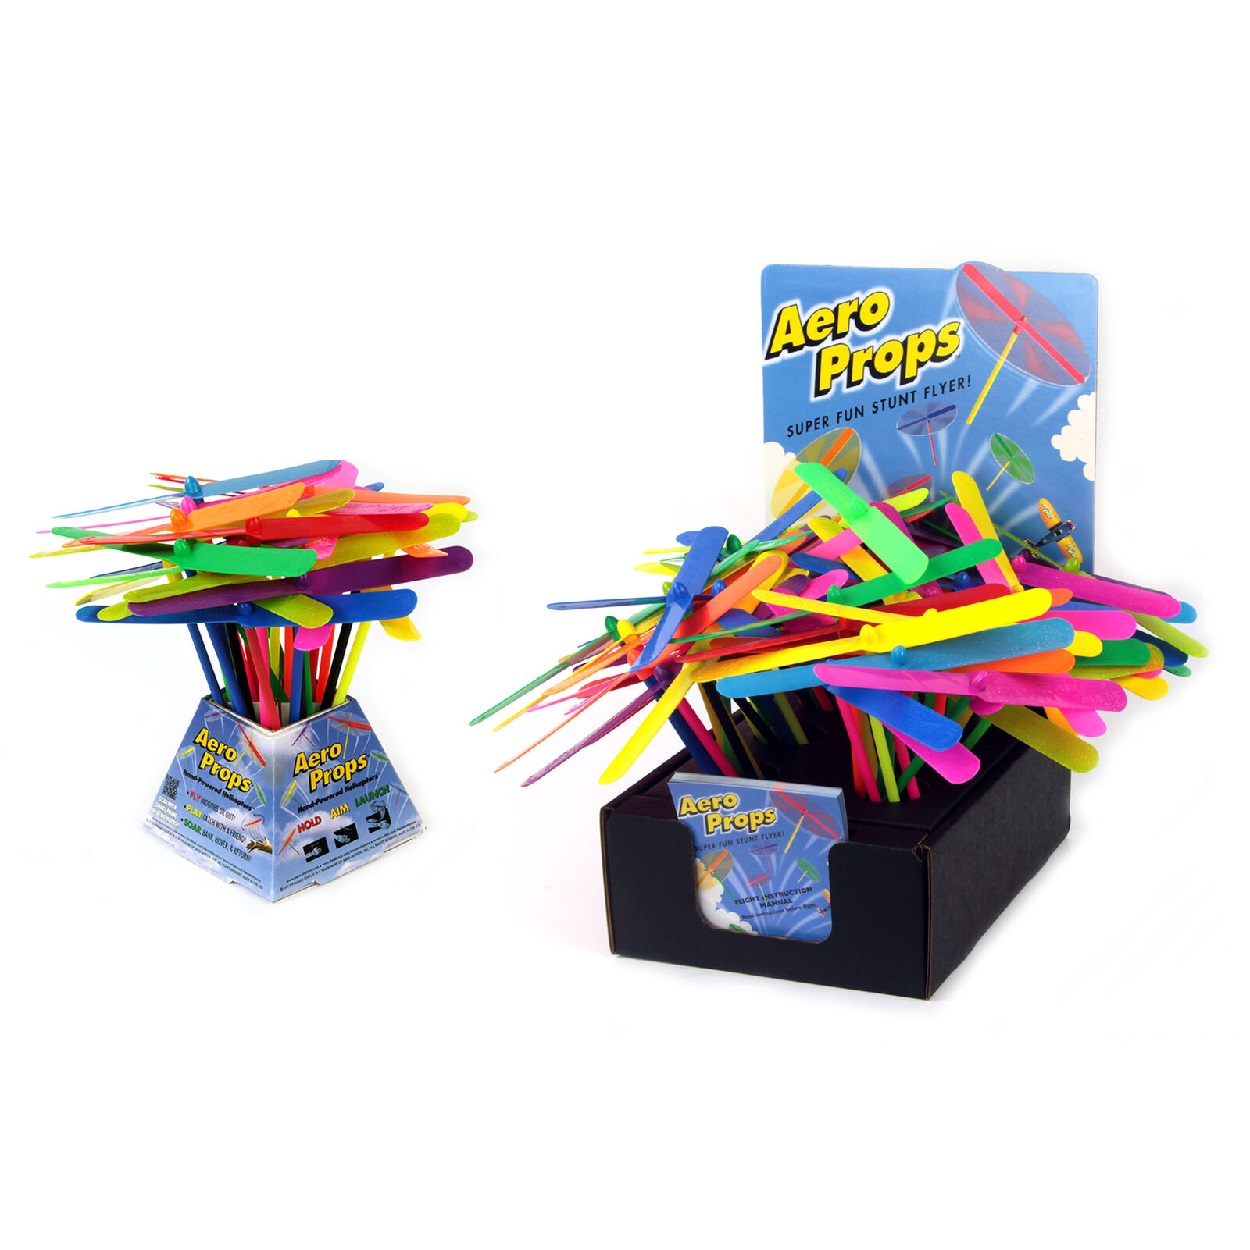 Aero-Motion V48540 Aero Props Flying Propeller Toy, Assorted colors